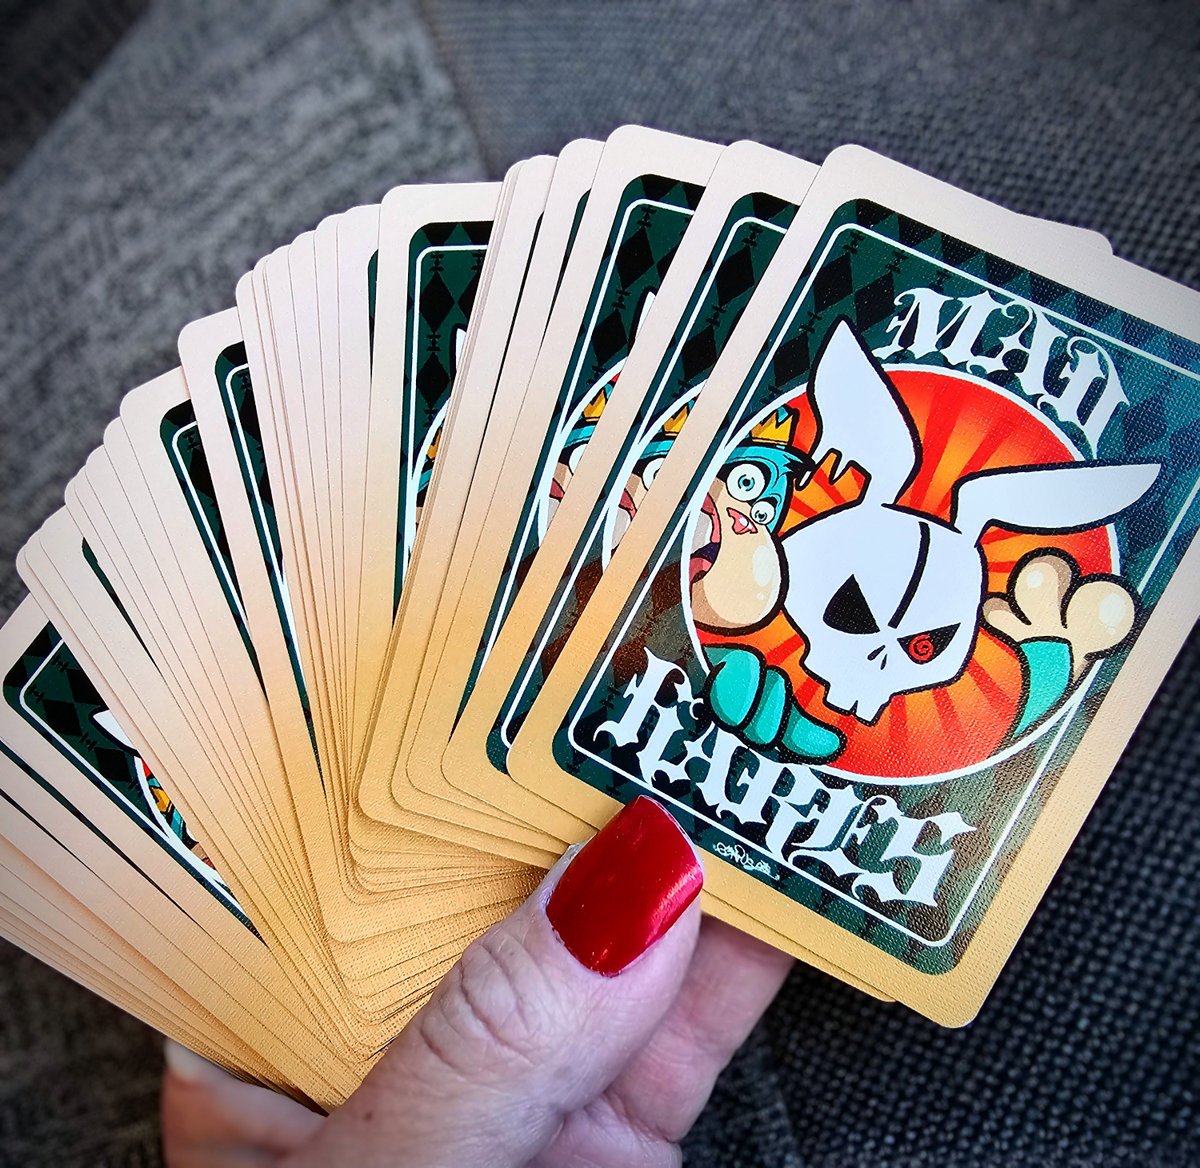 🃏 Fast Poker Bash 🃏 Starts in 30 min 🕐 🏆 Prizes! ● $3 entry @DEALMtoken/@martechnetworks Sunday ● @HeroesOfHiraeth Potion Must FOLLOW, 👍, RETWEET & TAG 2 🤝 to claim prizes! ✨️ 👉PASSWORD👈 🎉 Holder Touney starts 11/8! ♦️Cards by @ElRealGenius NOW AVAILABLE!